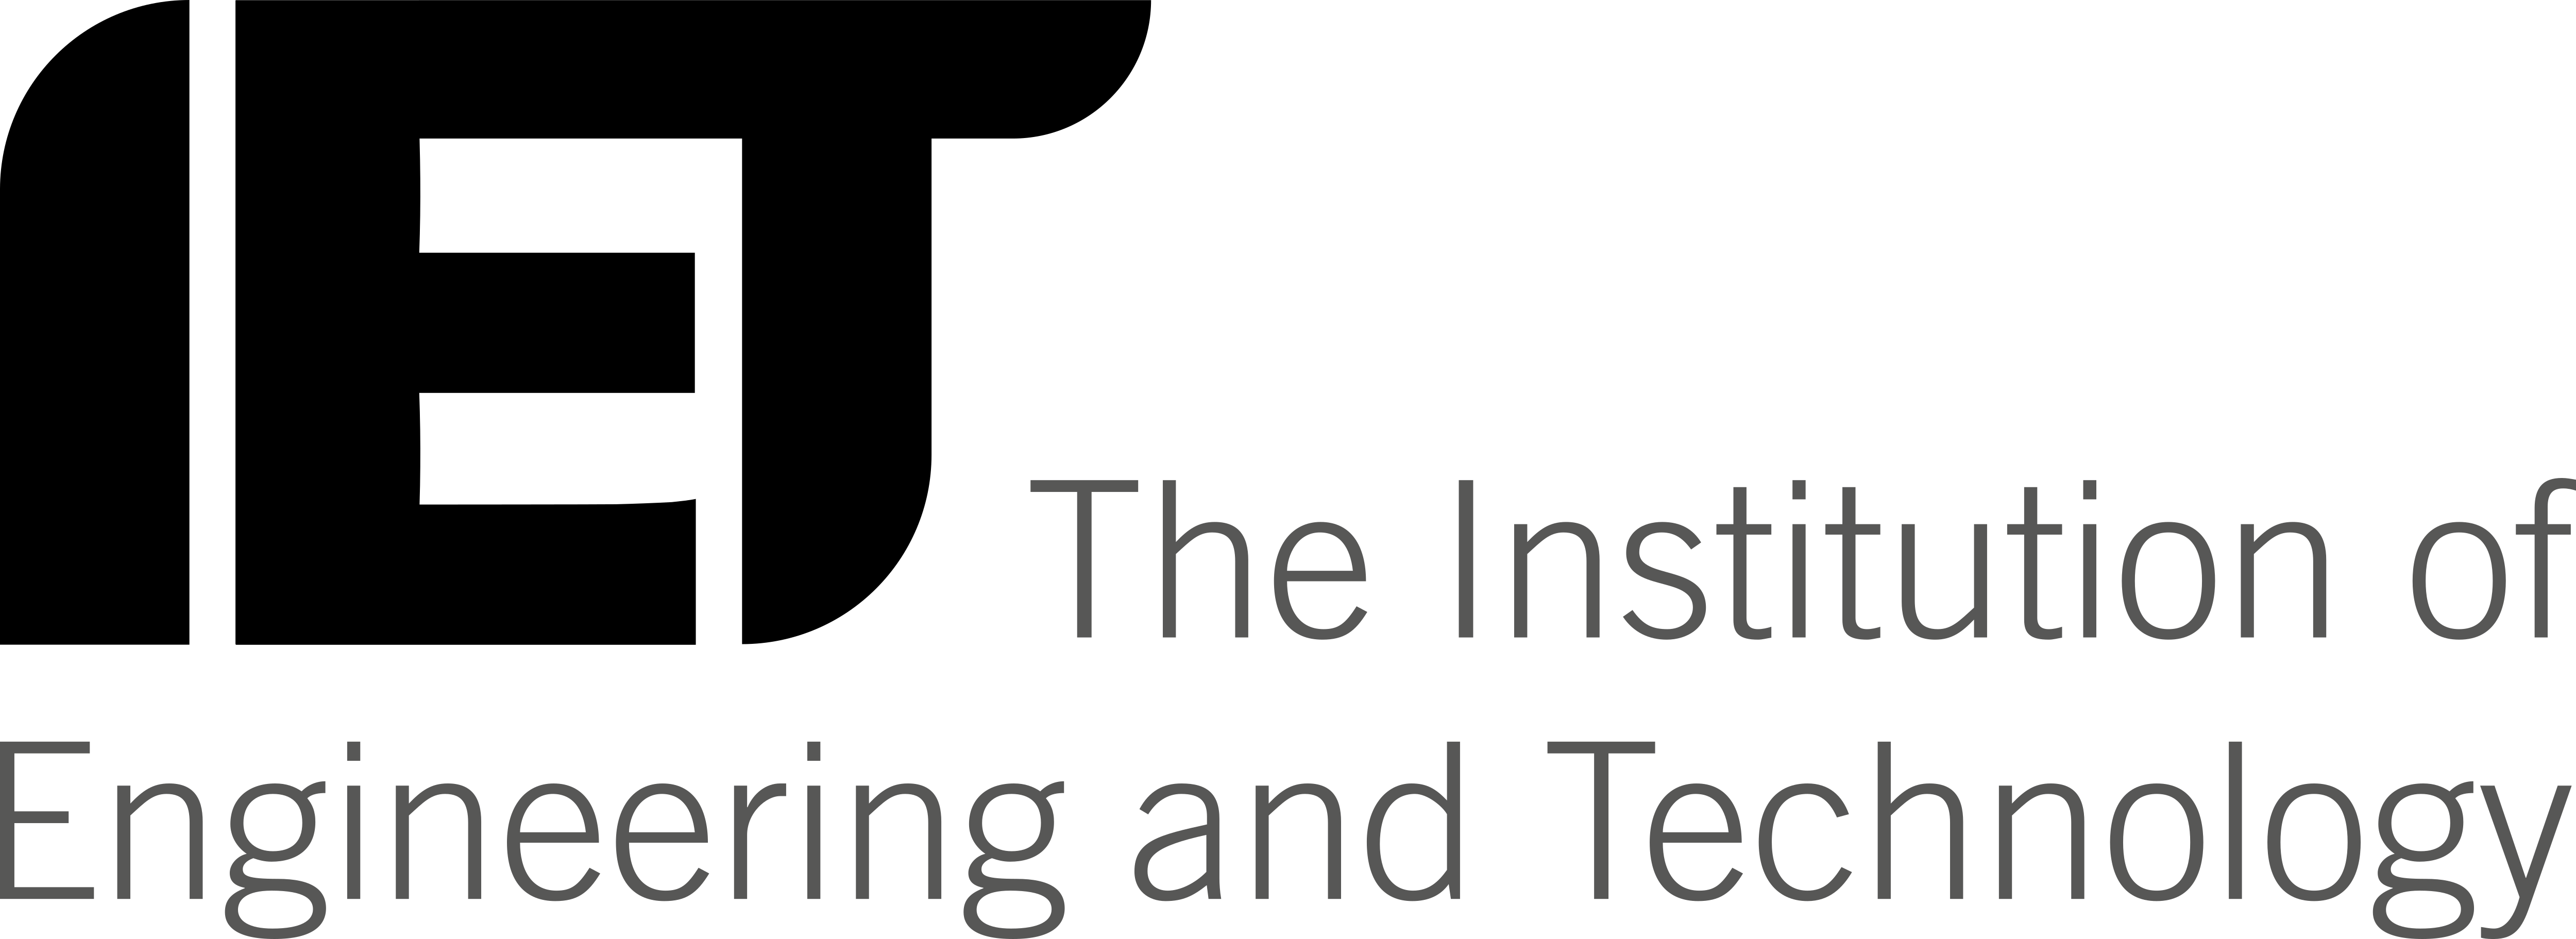 The Institution of Engineering and Technology – Logos Download